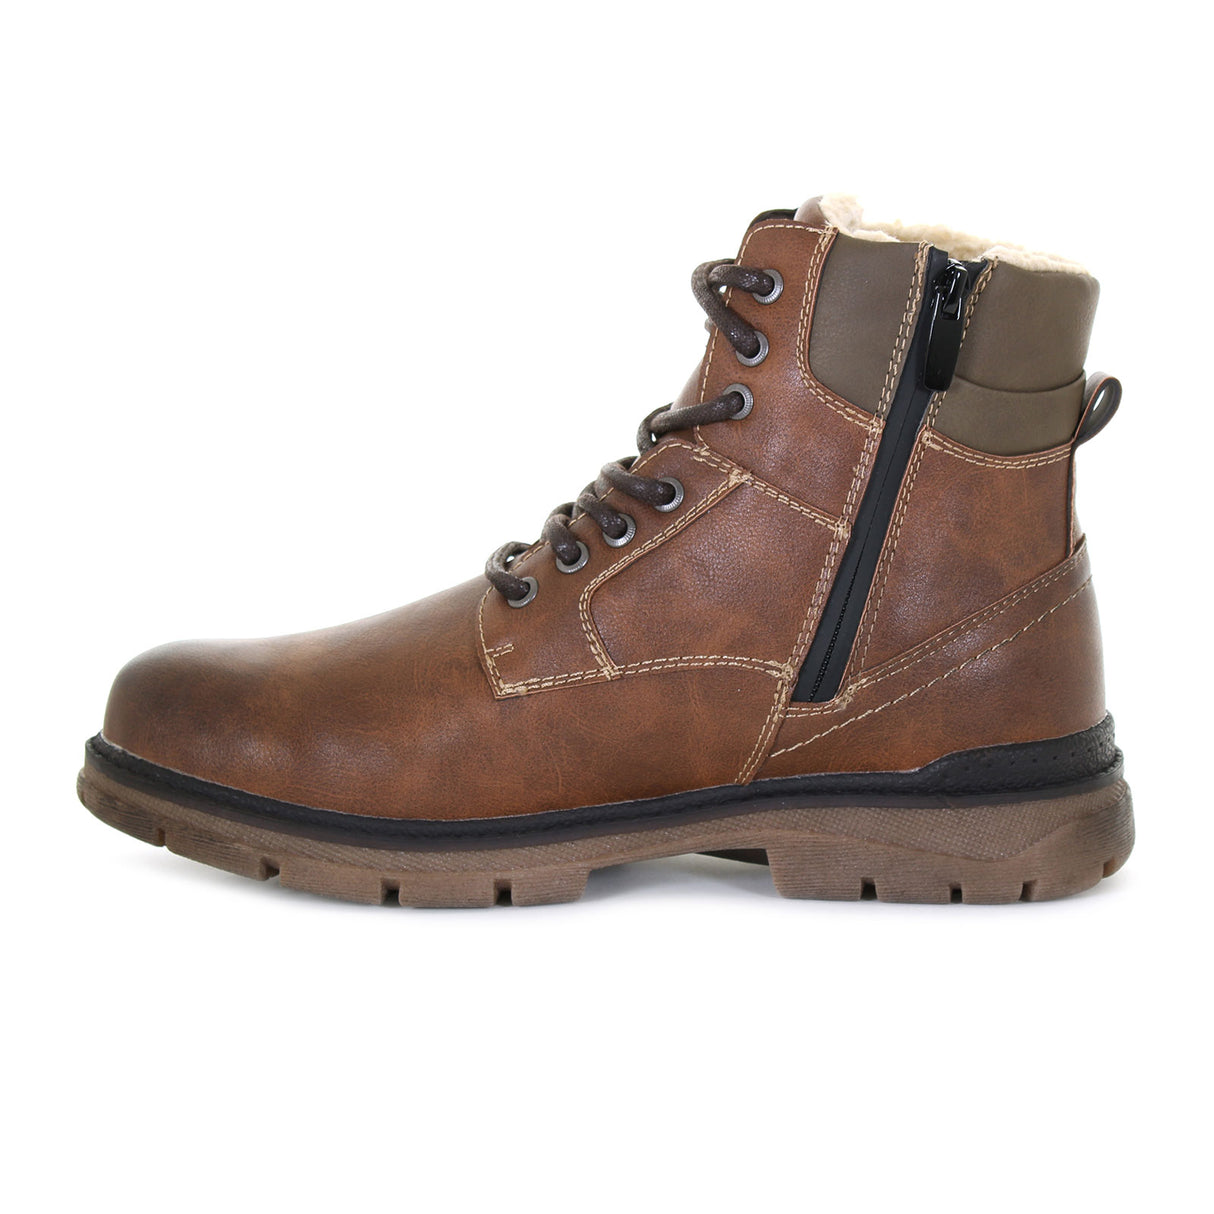 Wanderlust Chris Ankle Boot (Men) - Dark Brown Boots - Fashion - Ankle Boot - The Heel Shoe Fitters